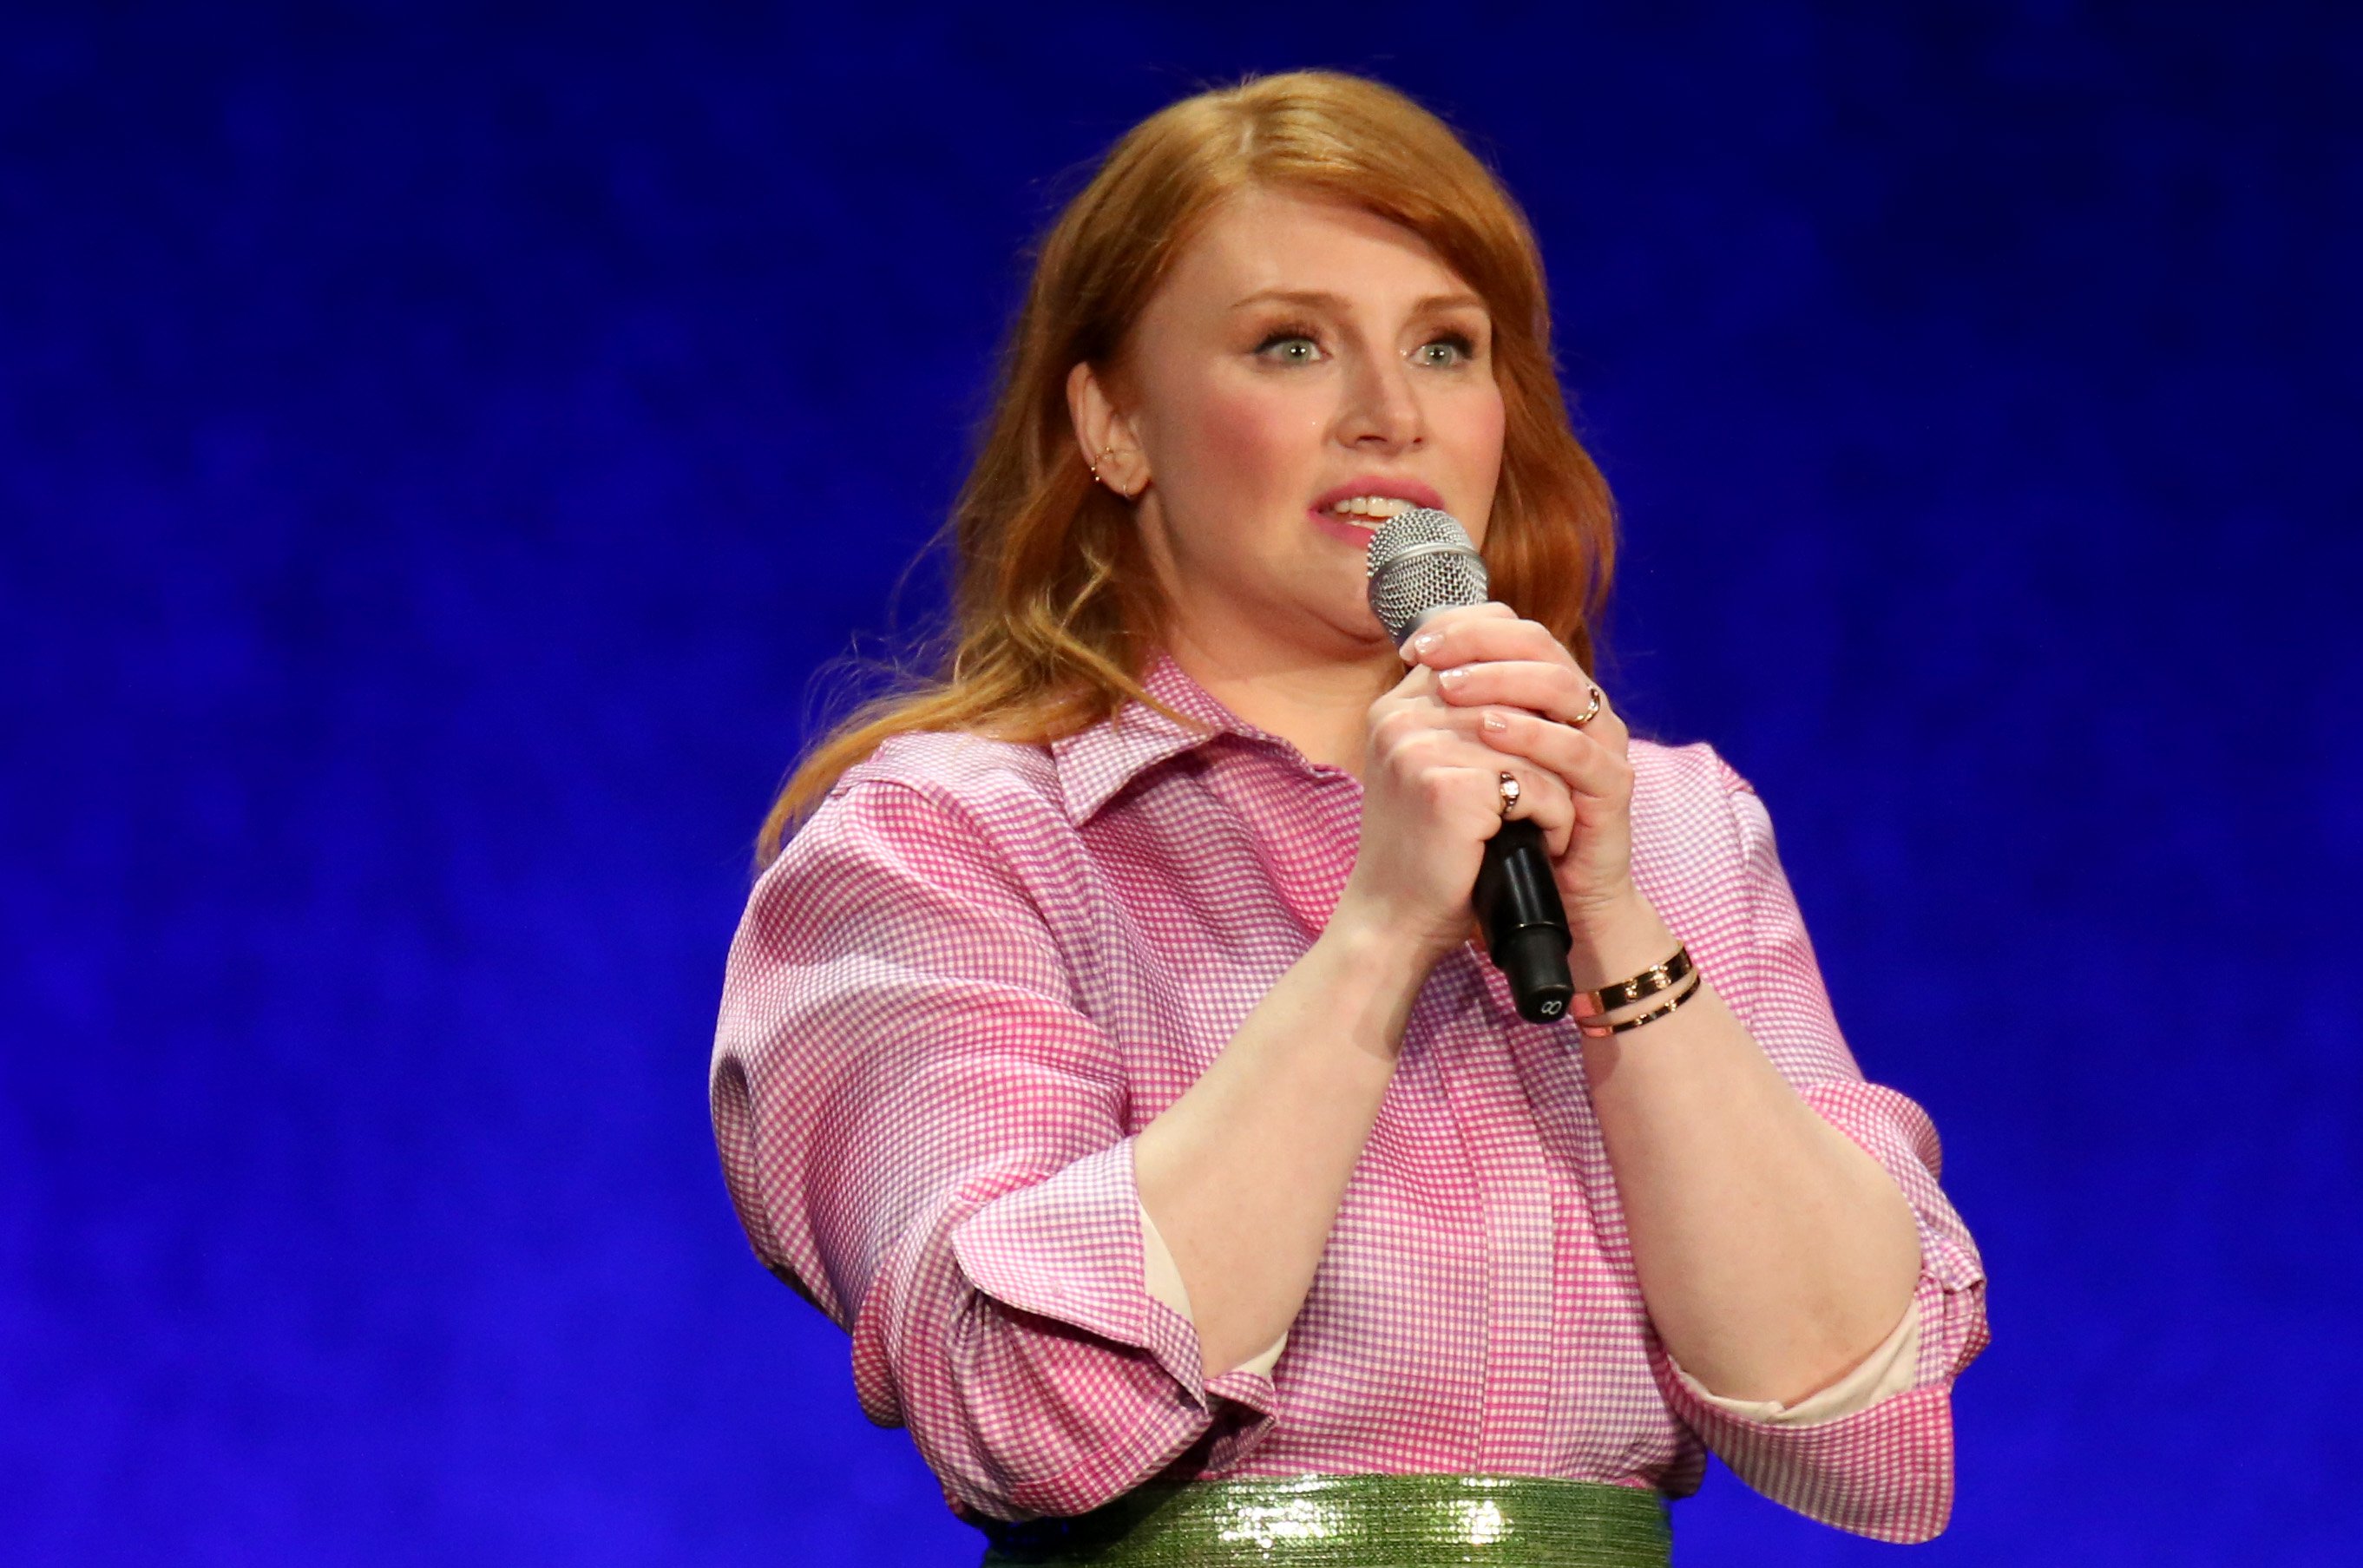 Star Wars director Bryce Dallas Howard speaks about her upcoming movie Jurassic World Dominion at CinemaCon 2022